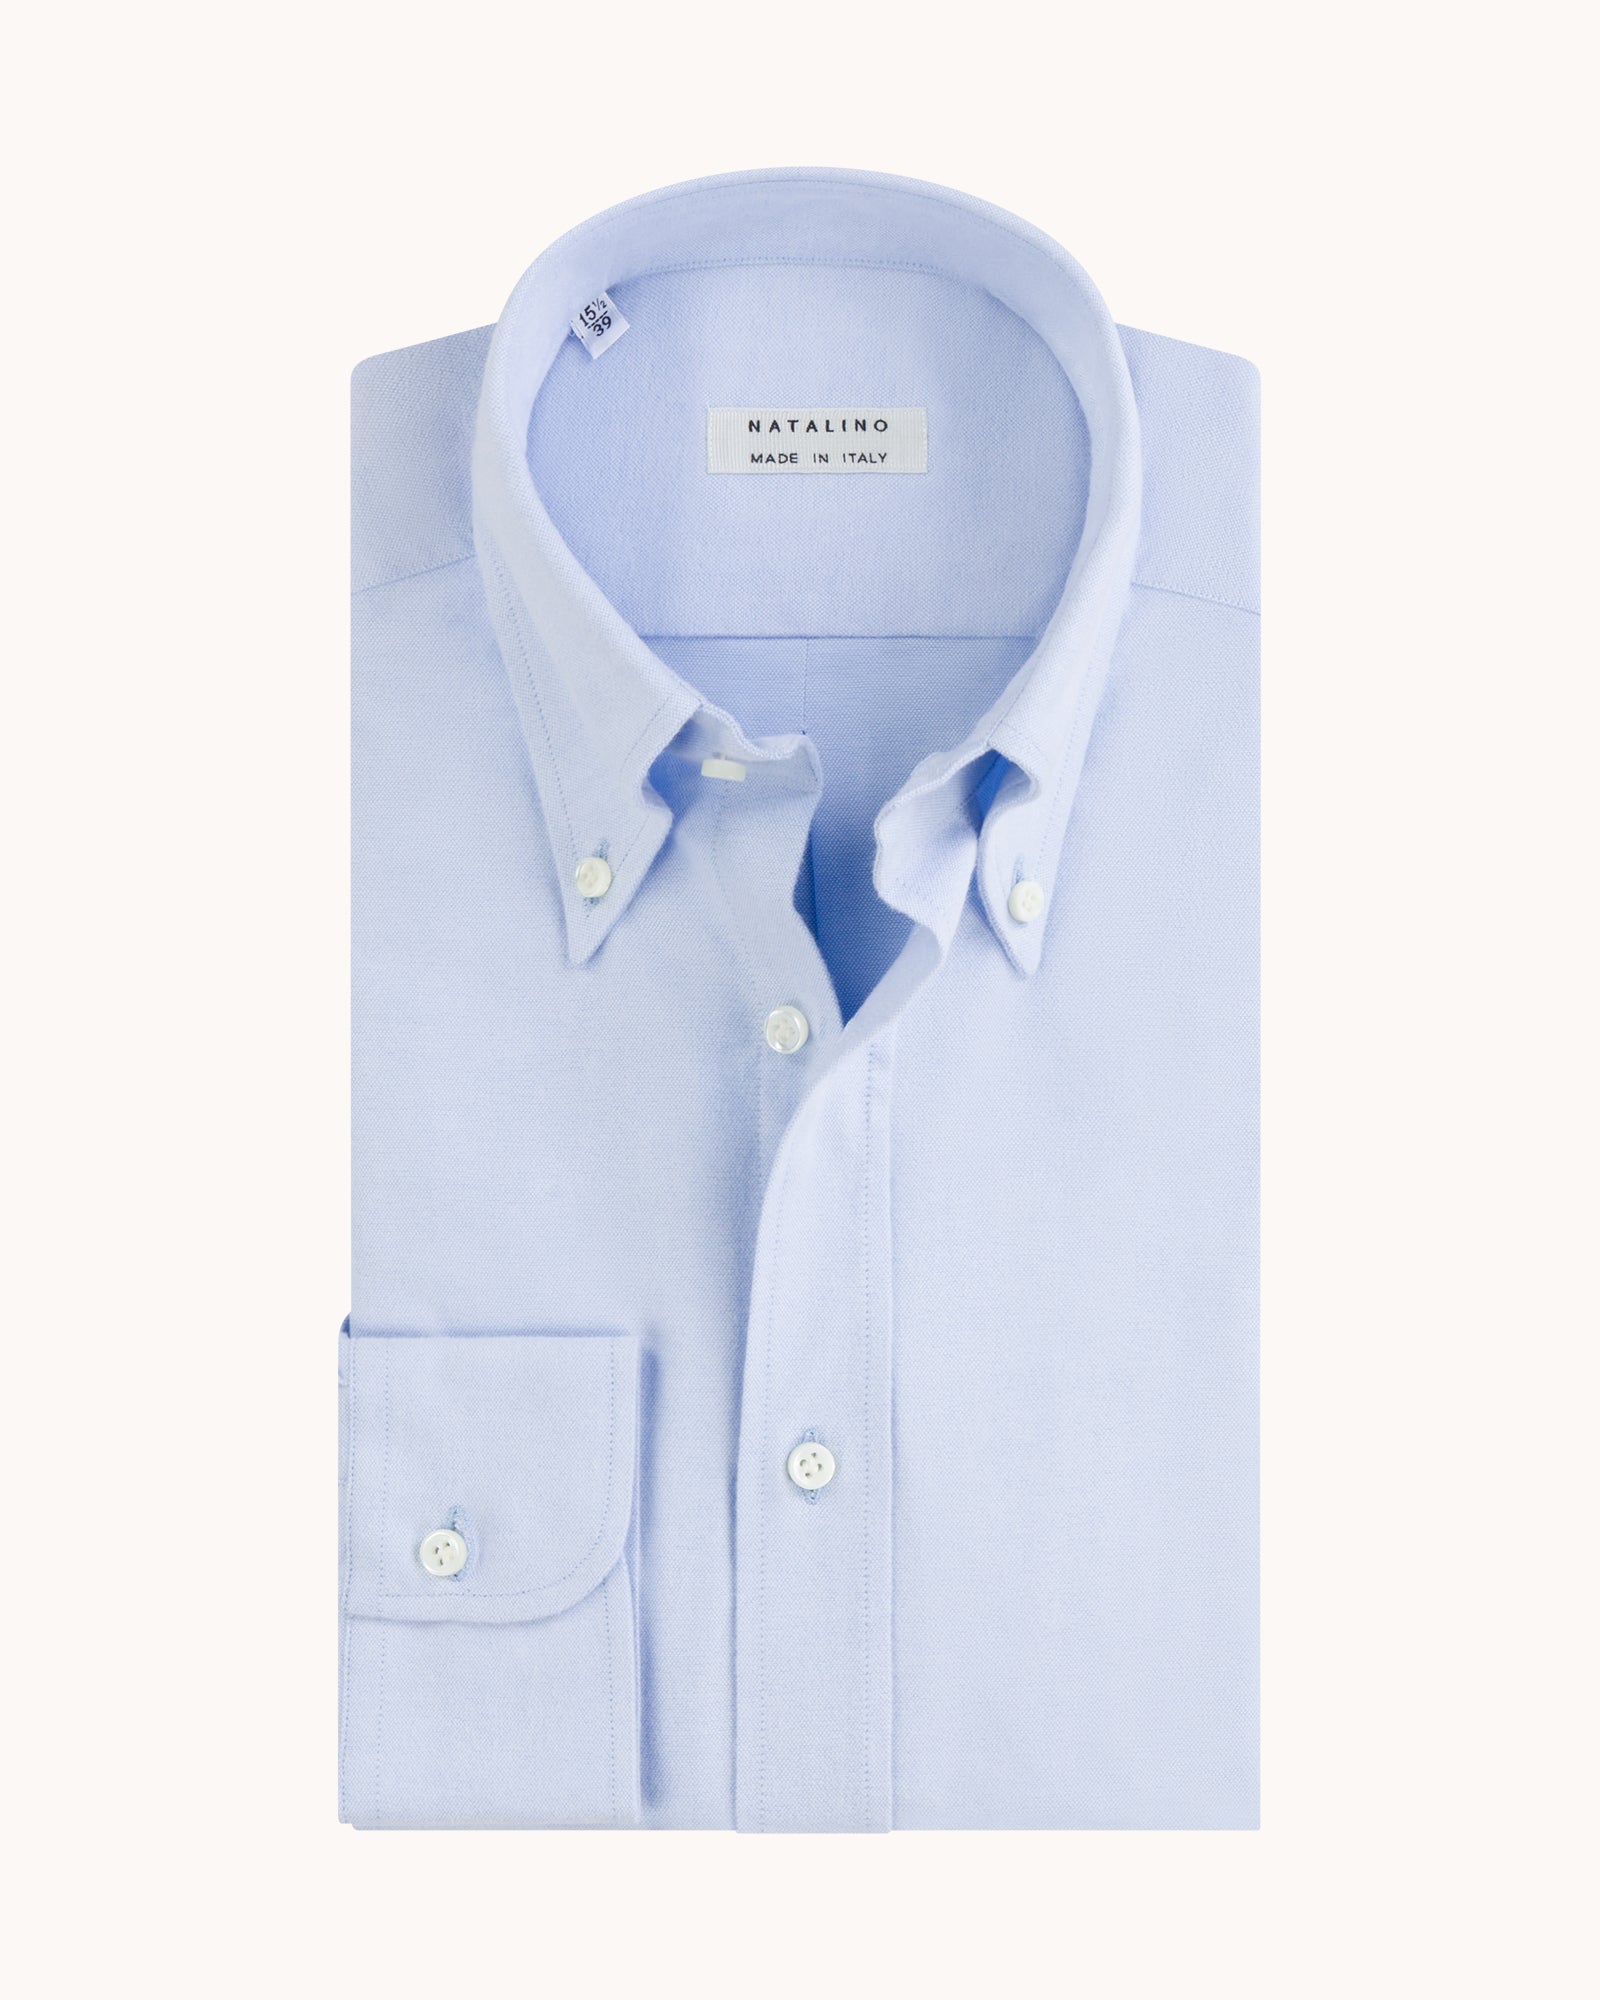 Button Down Collar Shirt - Blue Brushed Oxford Cotton